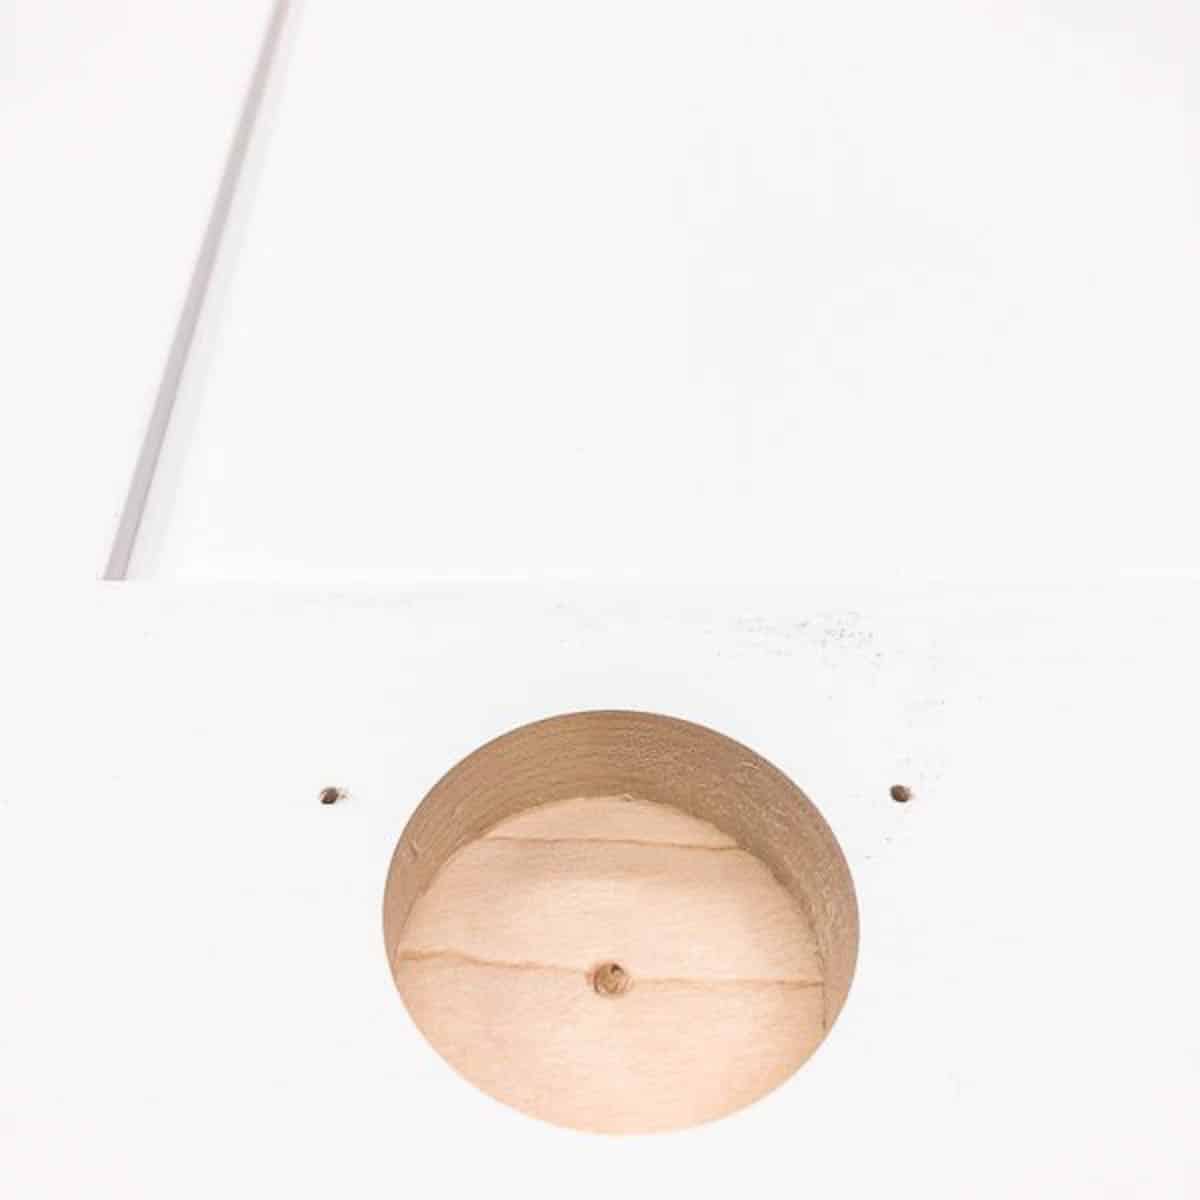 hinge hole created by the concealed hinge jig